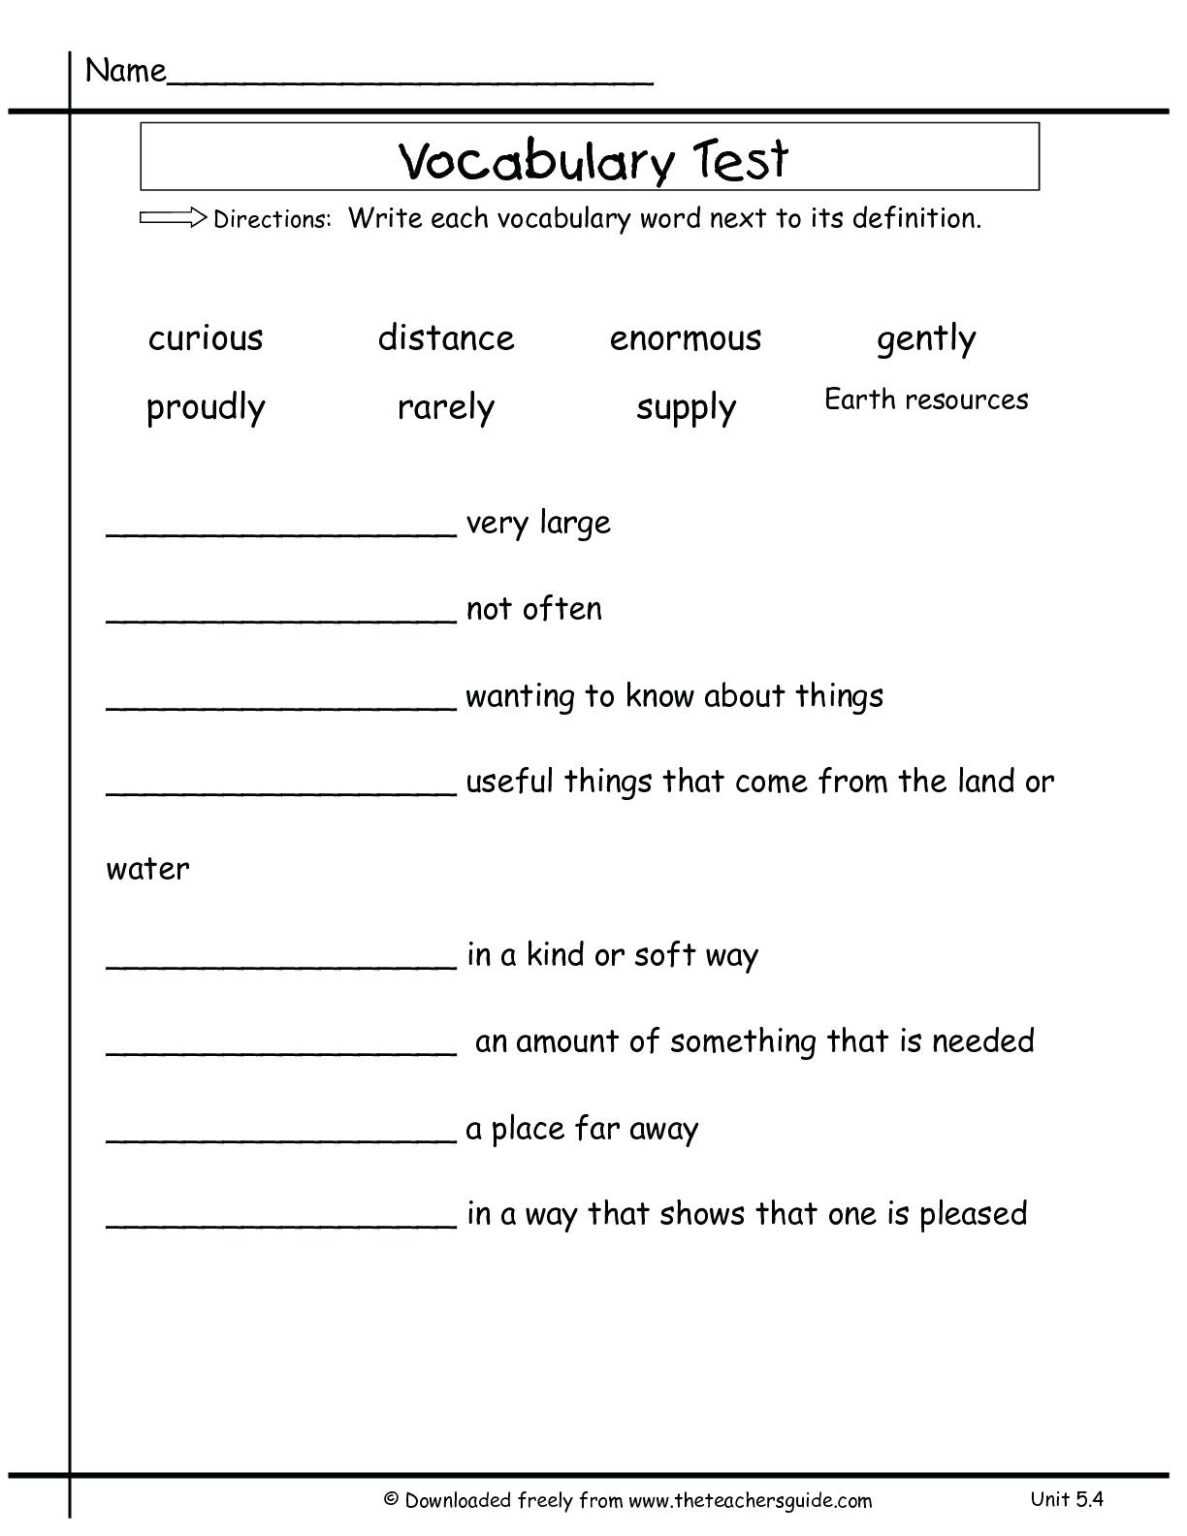 vocabulary-words-for-2nd-grade-calep-midnightpig-co-within-vocabulary